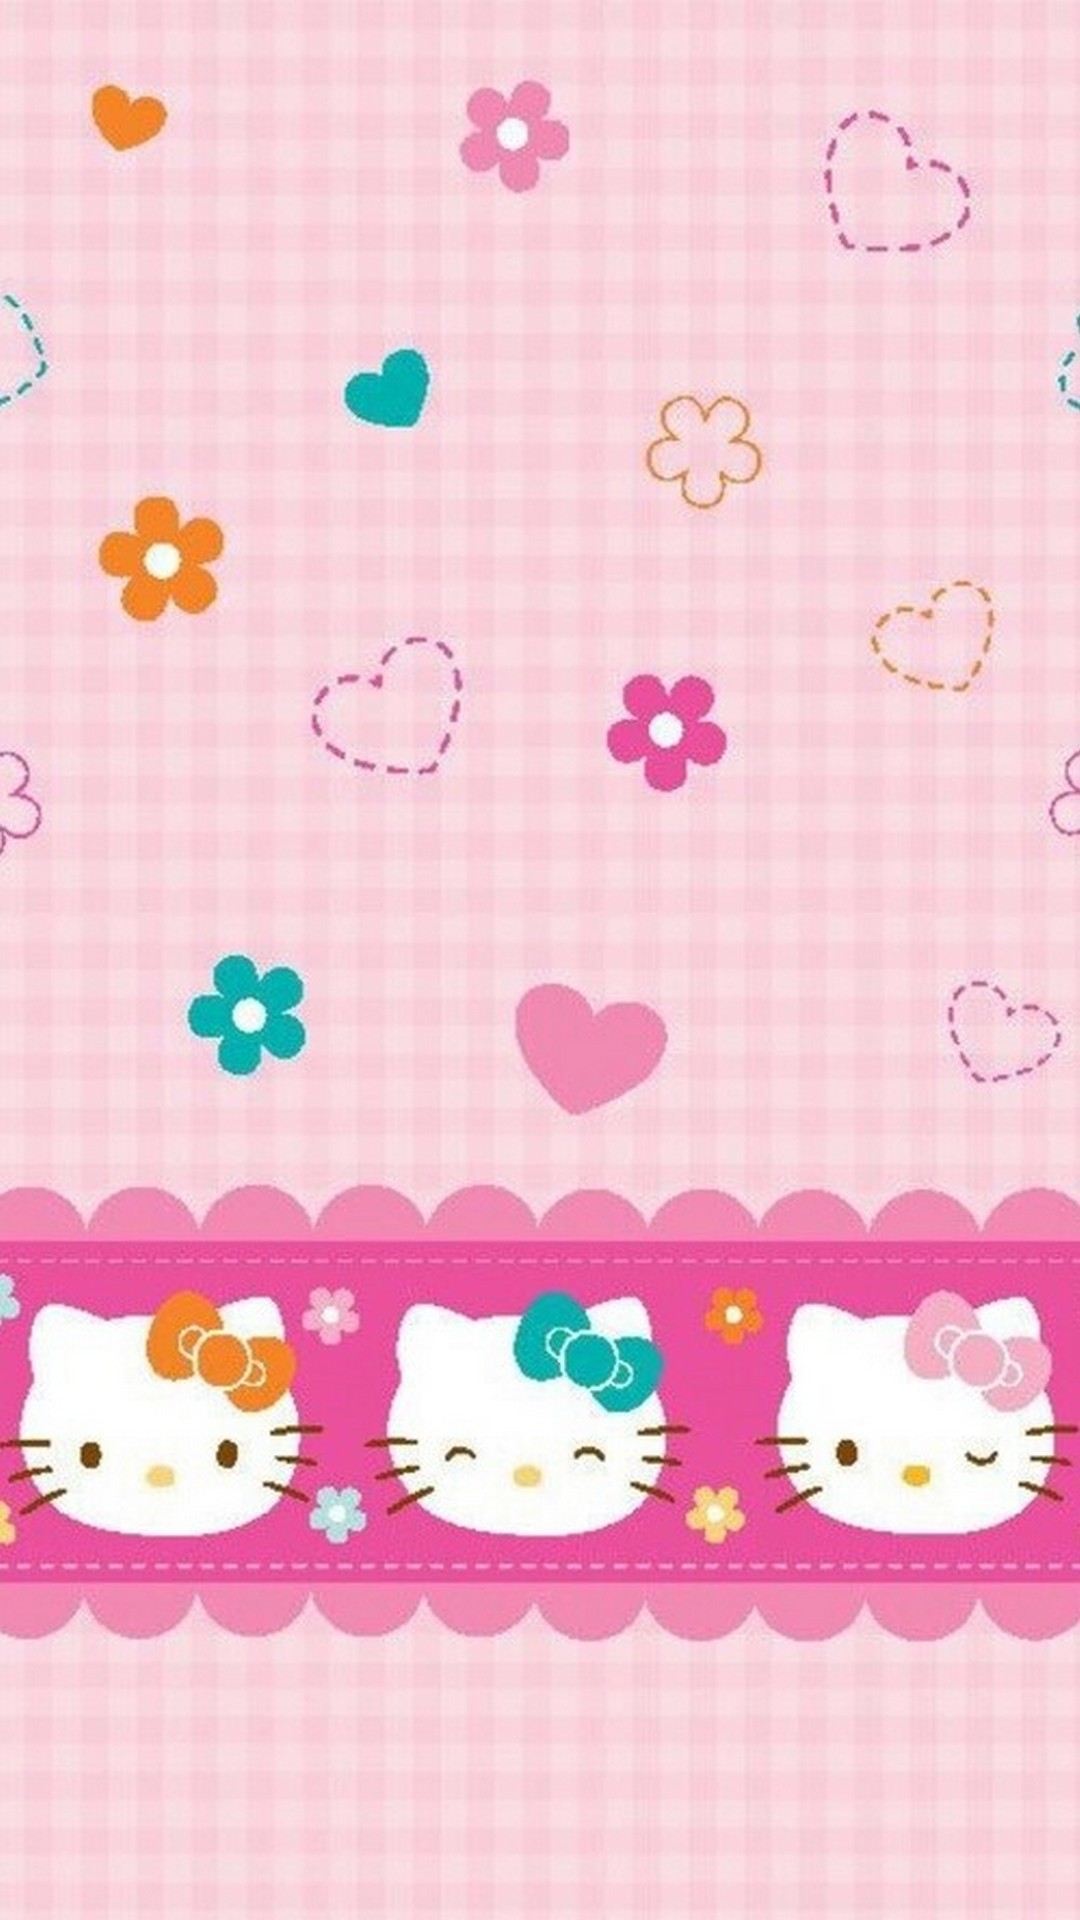 Wallpaper Android Hello Kitty Characters with resolution 1080X1920 pixel. You can make this wallpaper for your Android backgrounds, Tablet, Smartphones Screensavers and Mobile Phone Lock Screen